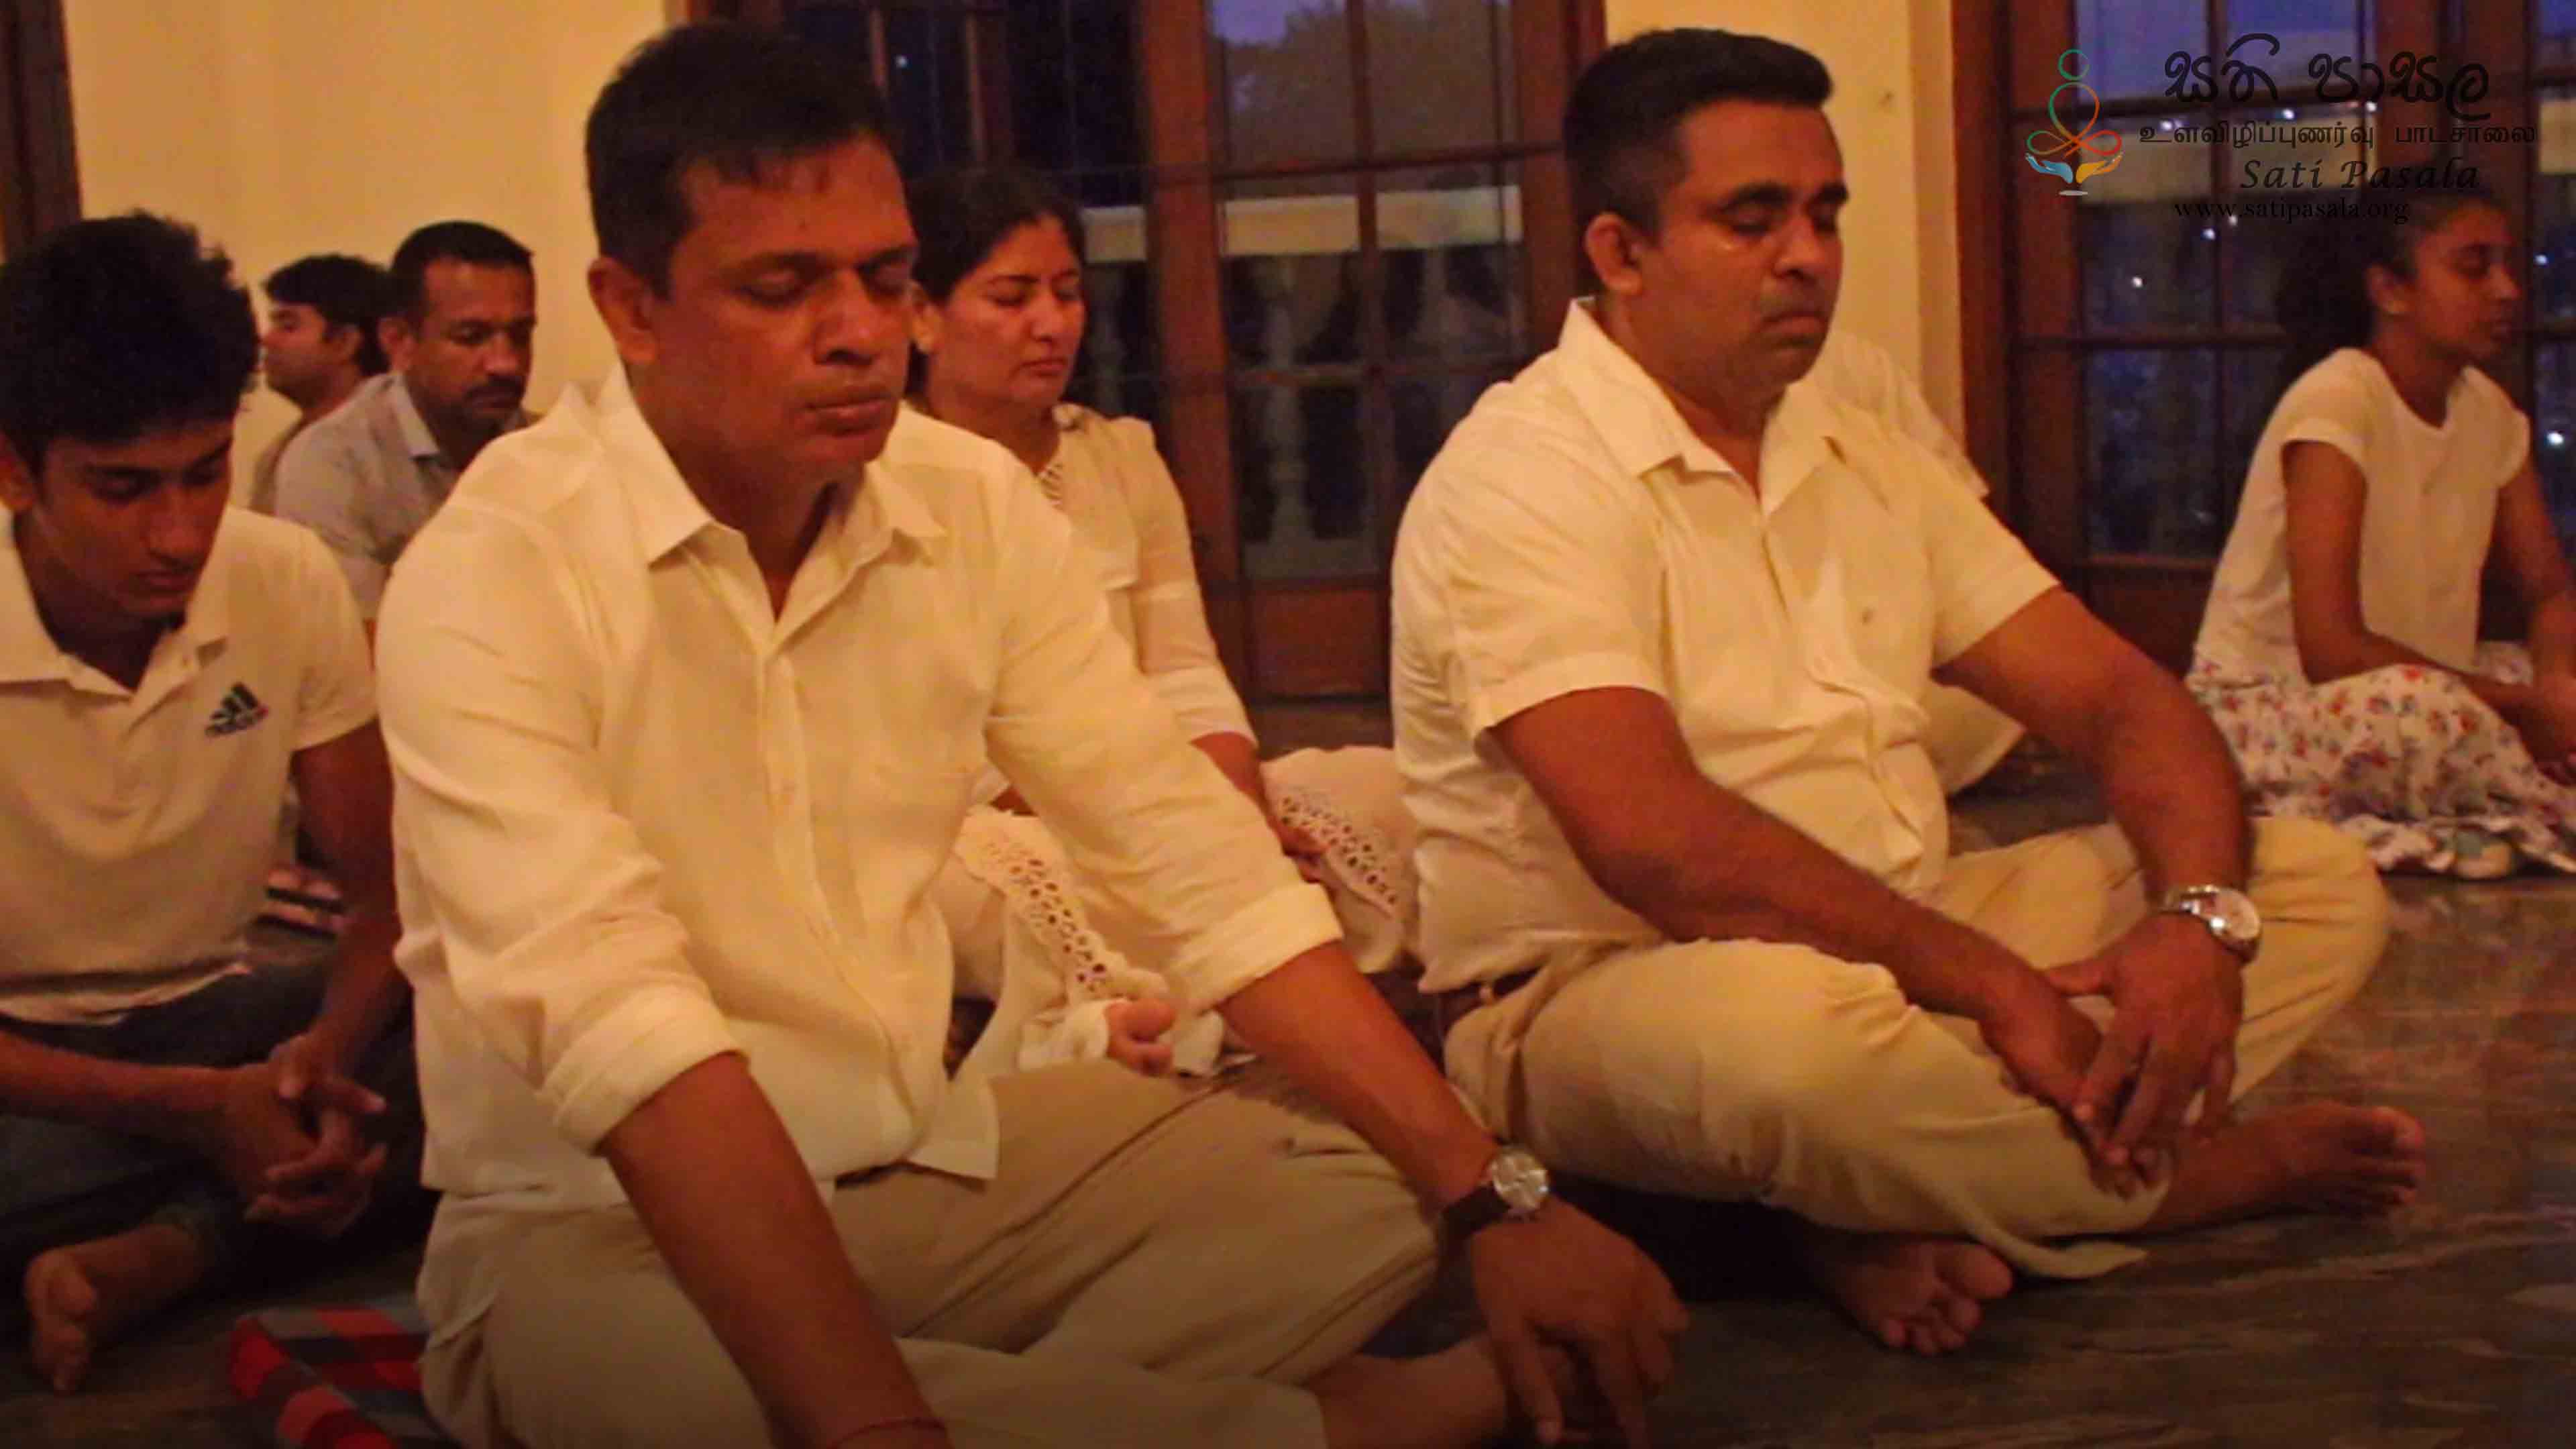 Sati Pasala Mindfulness Programme for Bankers & Executives - 13th February 2019